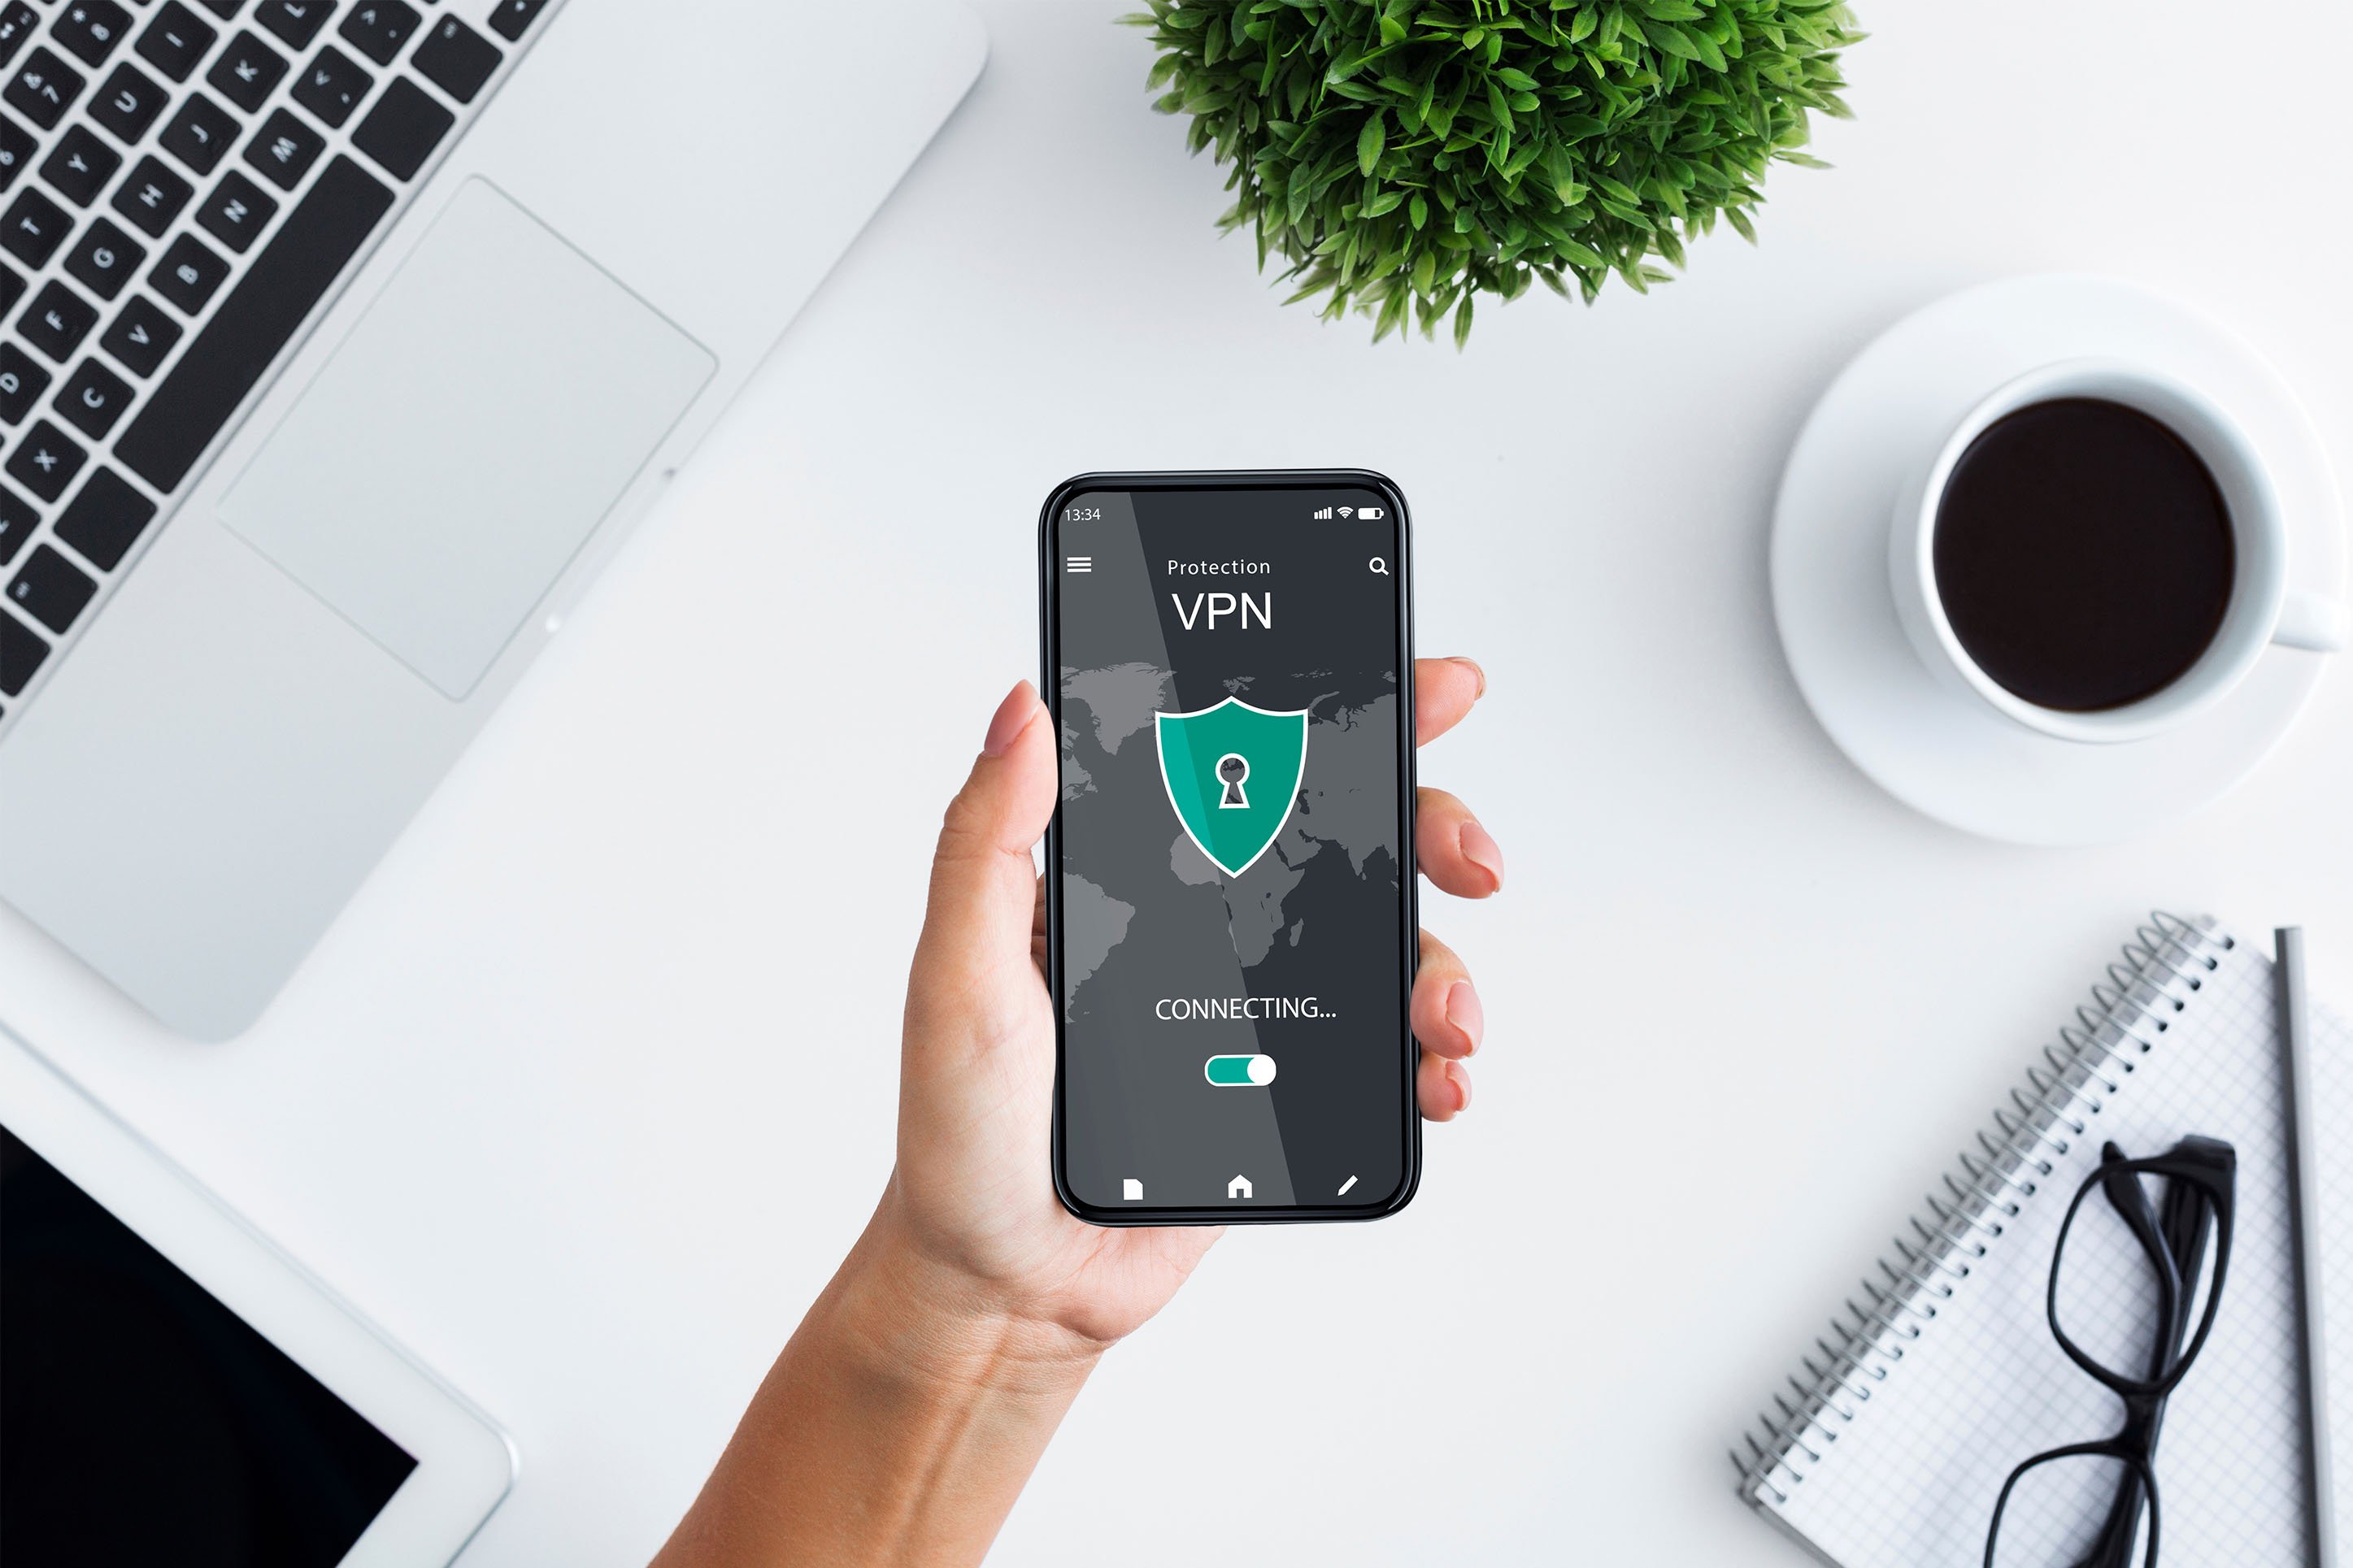 Image of a phone connecting to a VPN